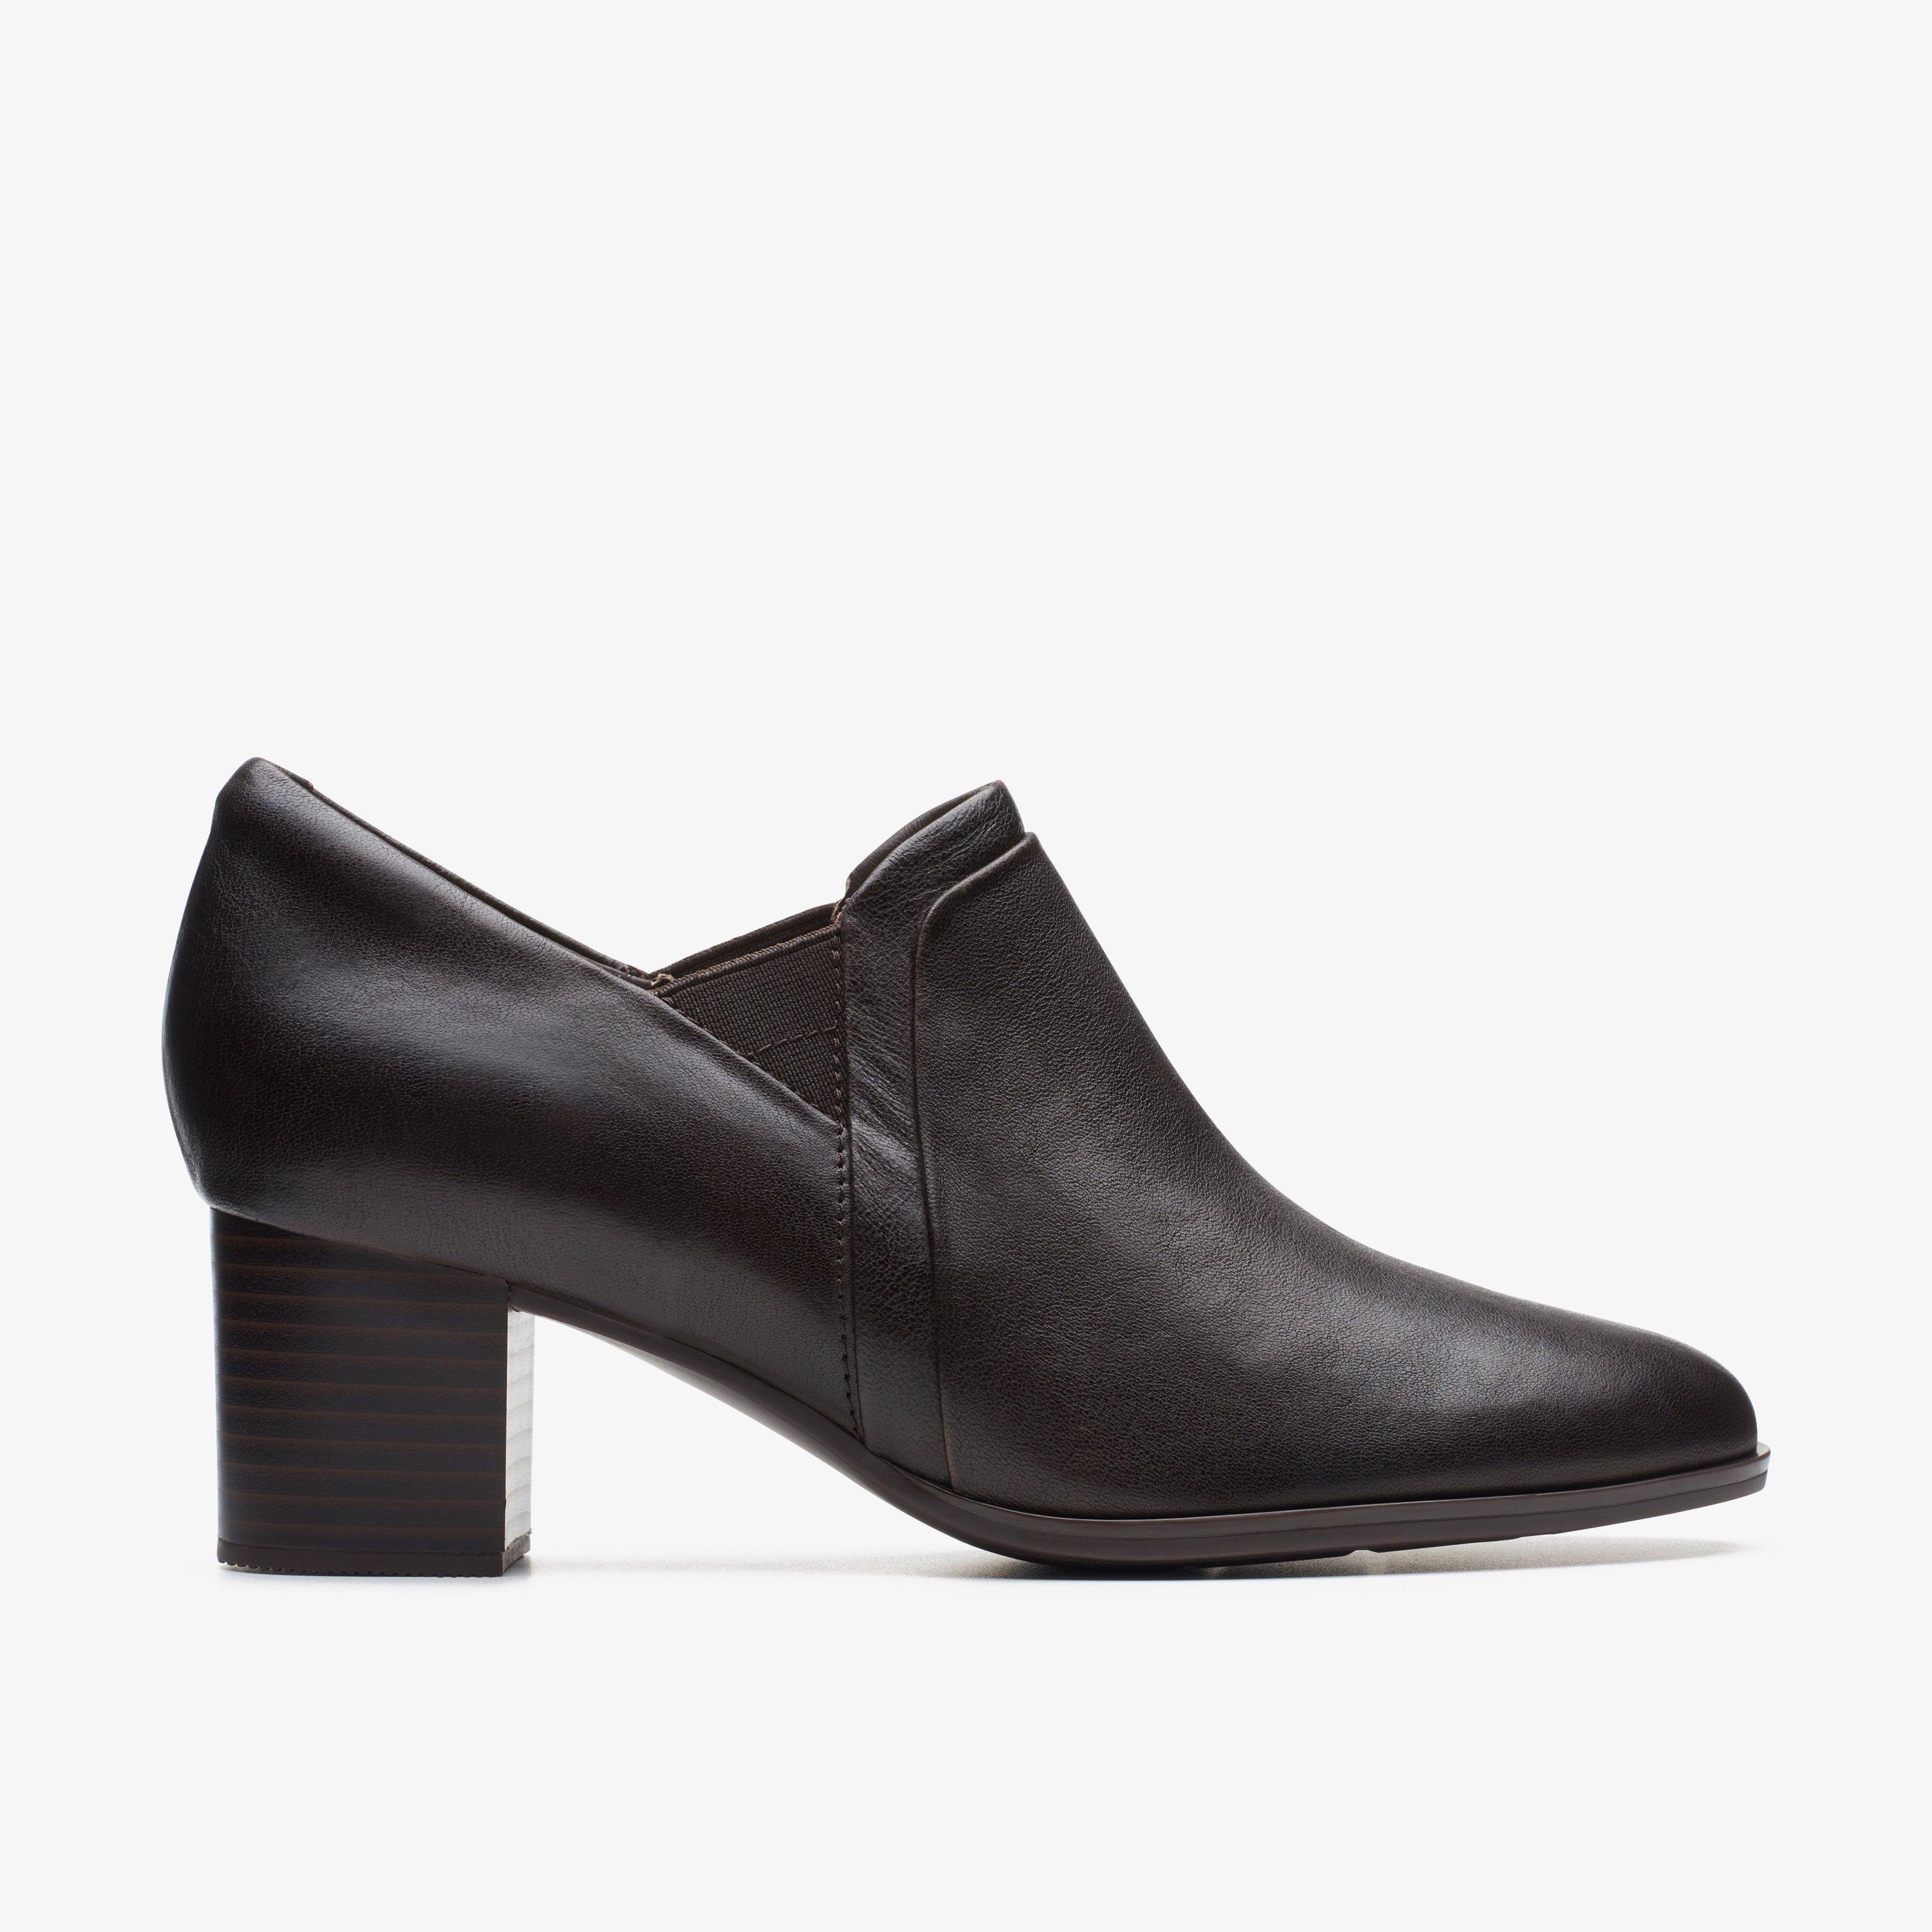 clarks dress shoes for women